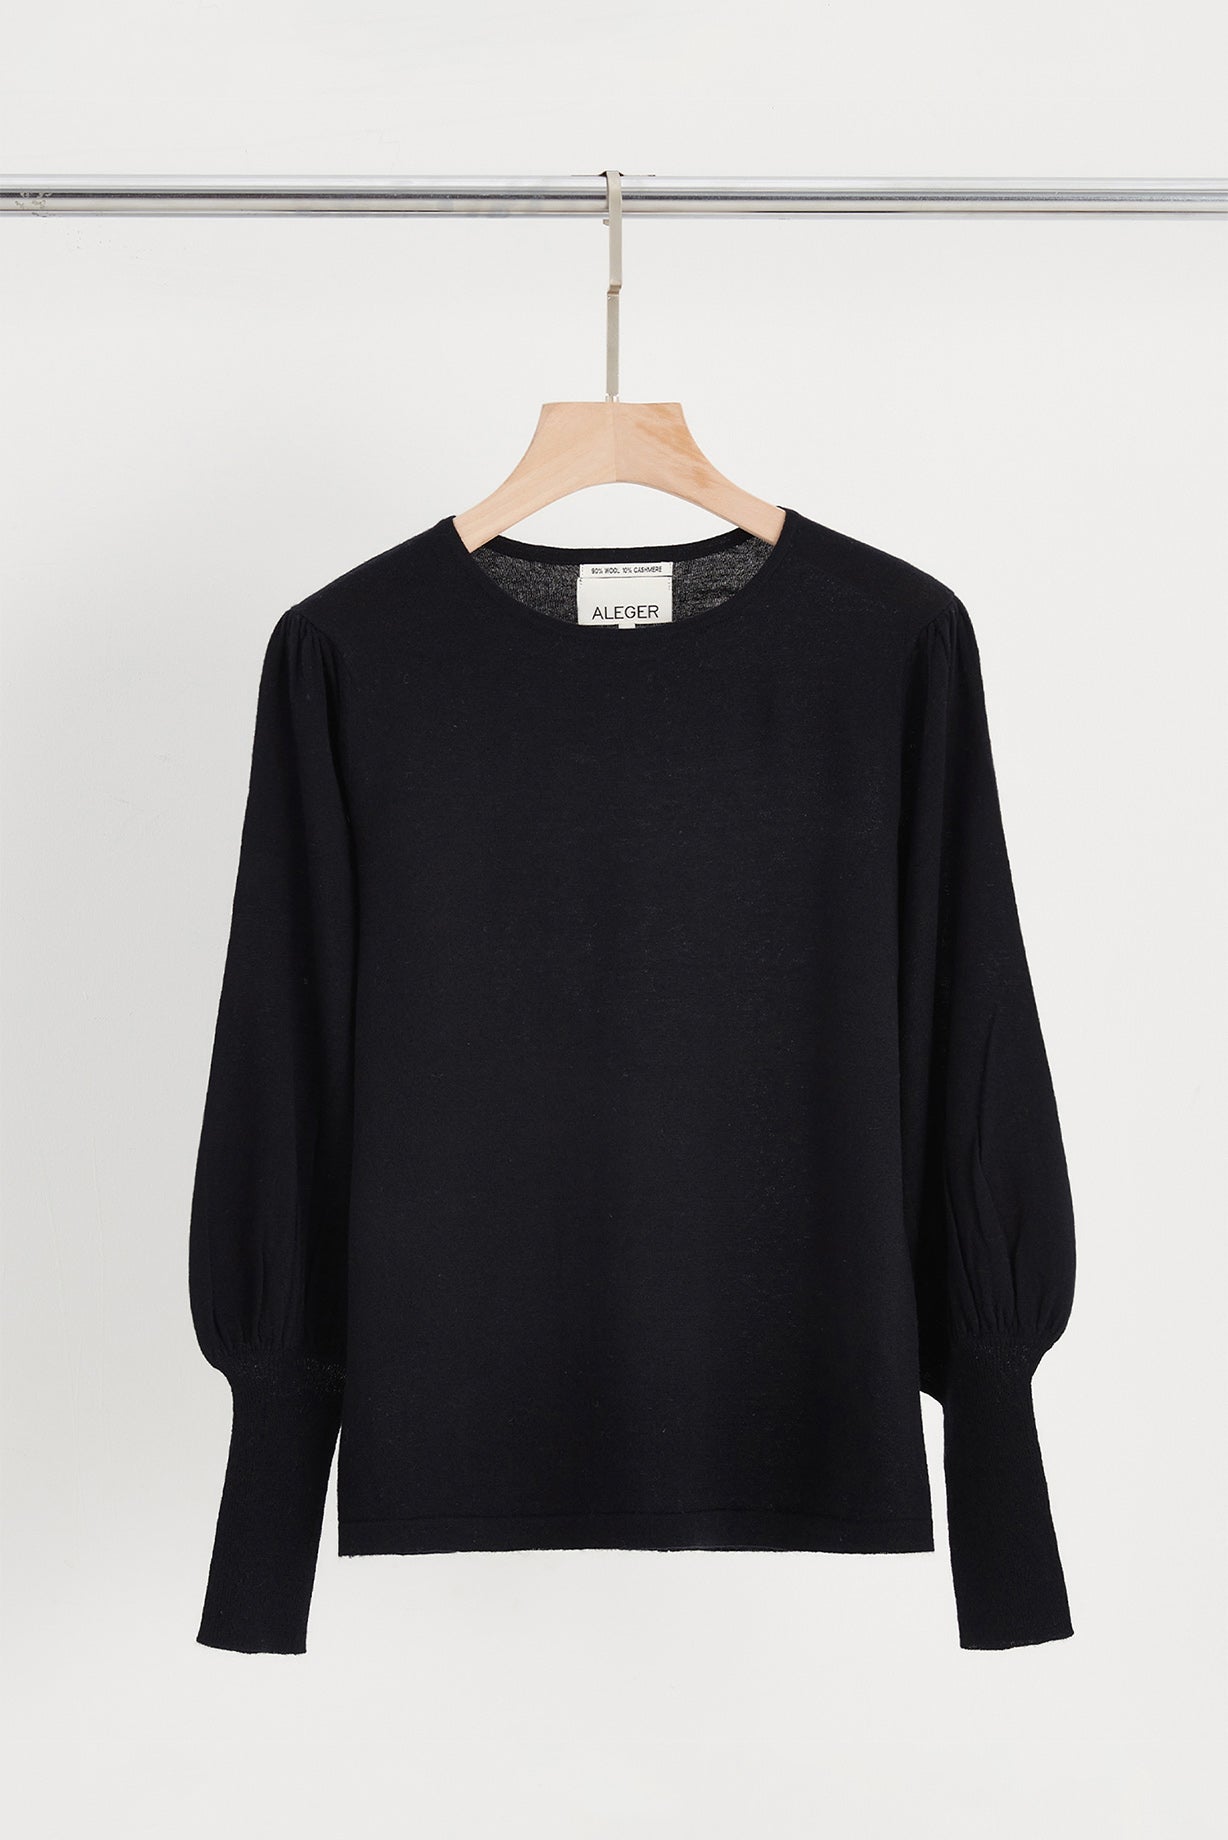 N.33 Cashmere Blend Bell Sleeve Crew